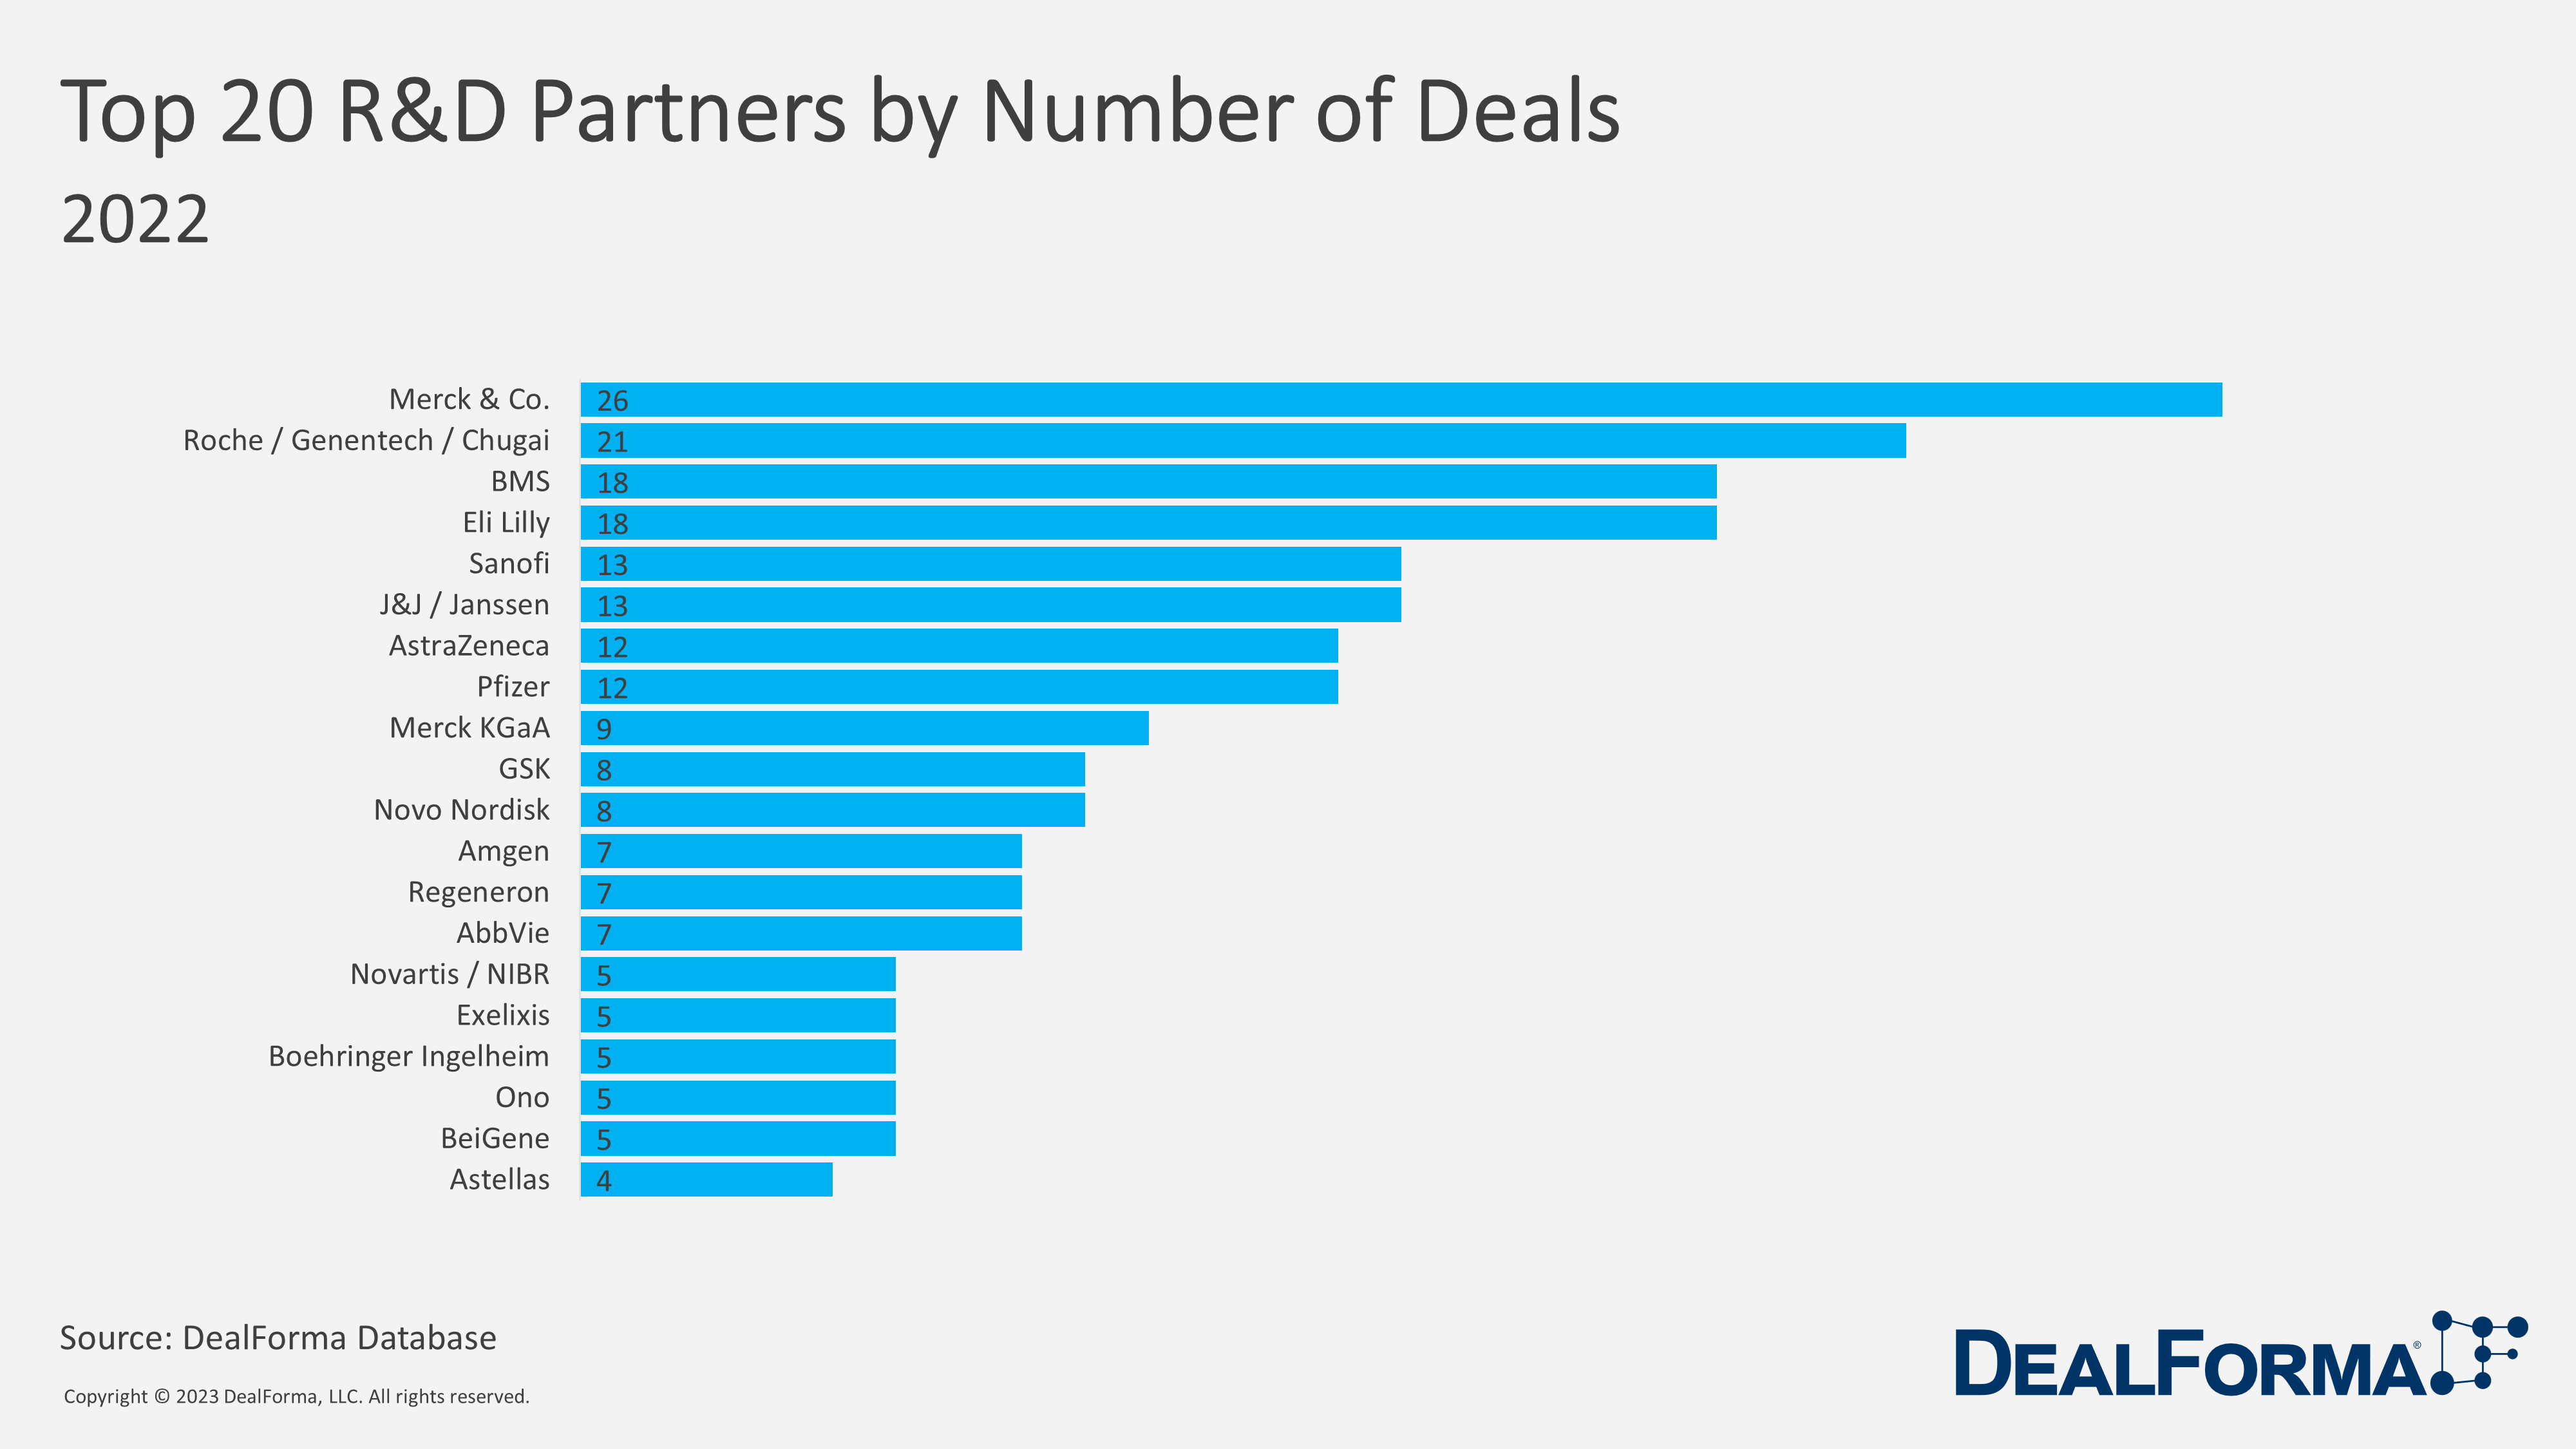 Top 20 R&D Partners by Number of Deals